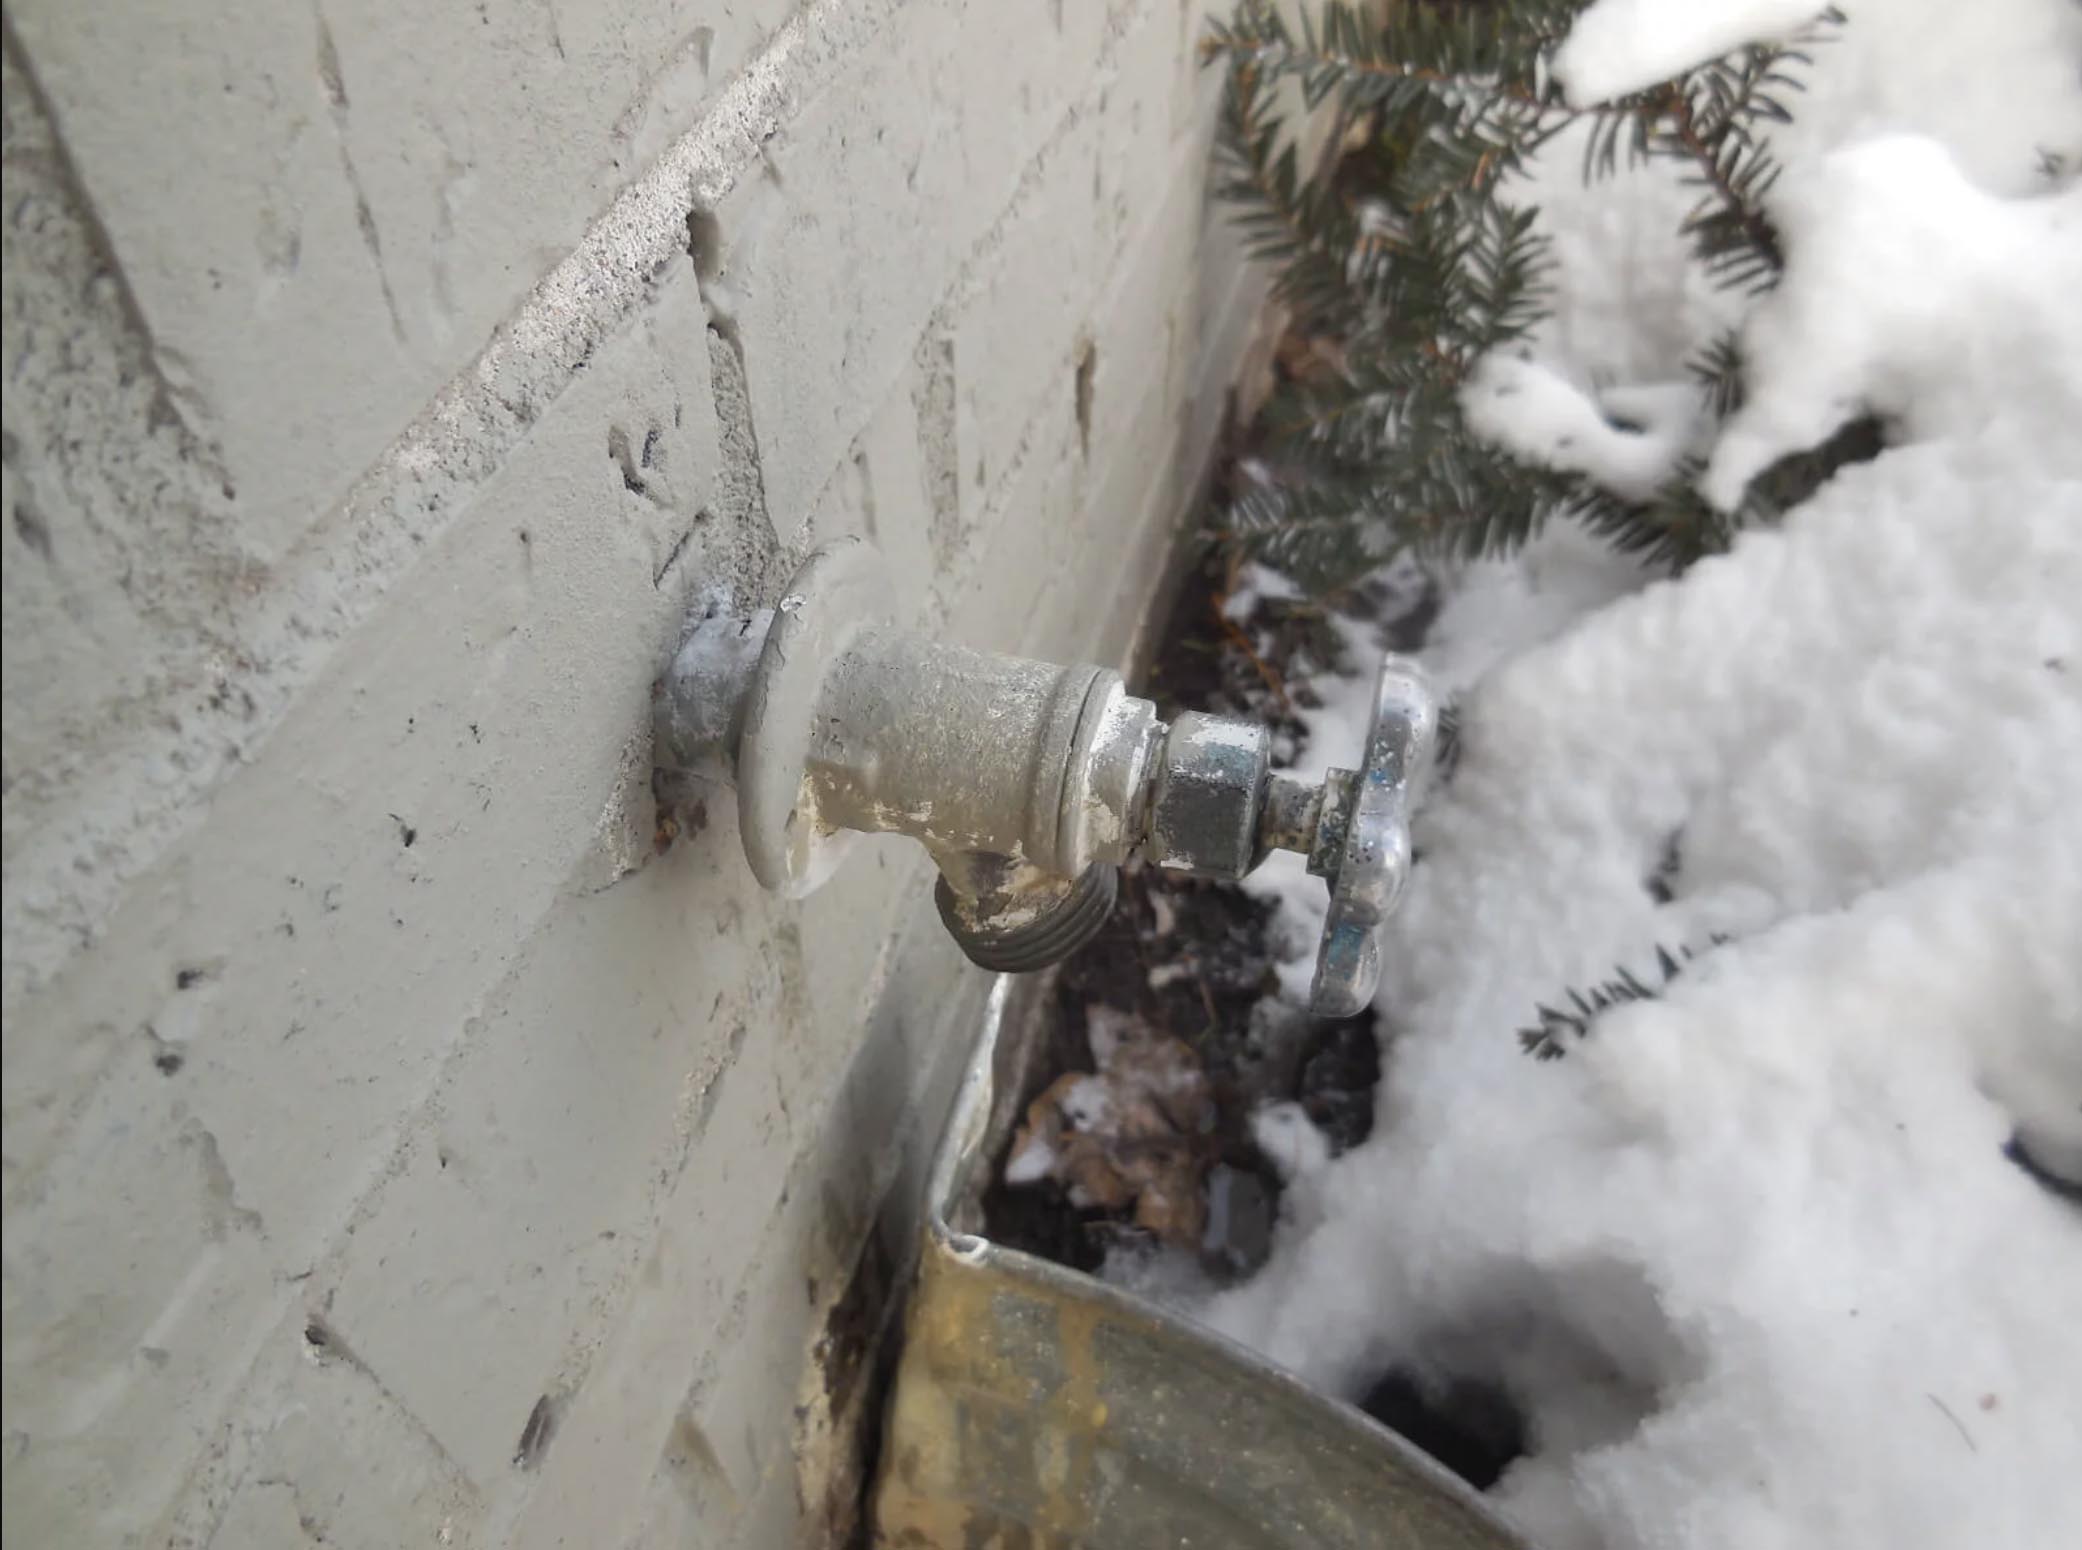 The snow has melted! If you haven’t experienced freezing faucets yet, now is the time to take them to prevent any future problems.